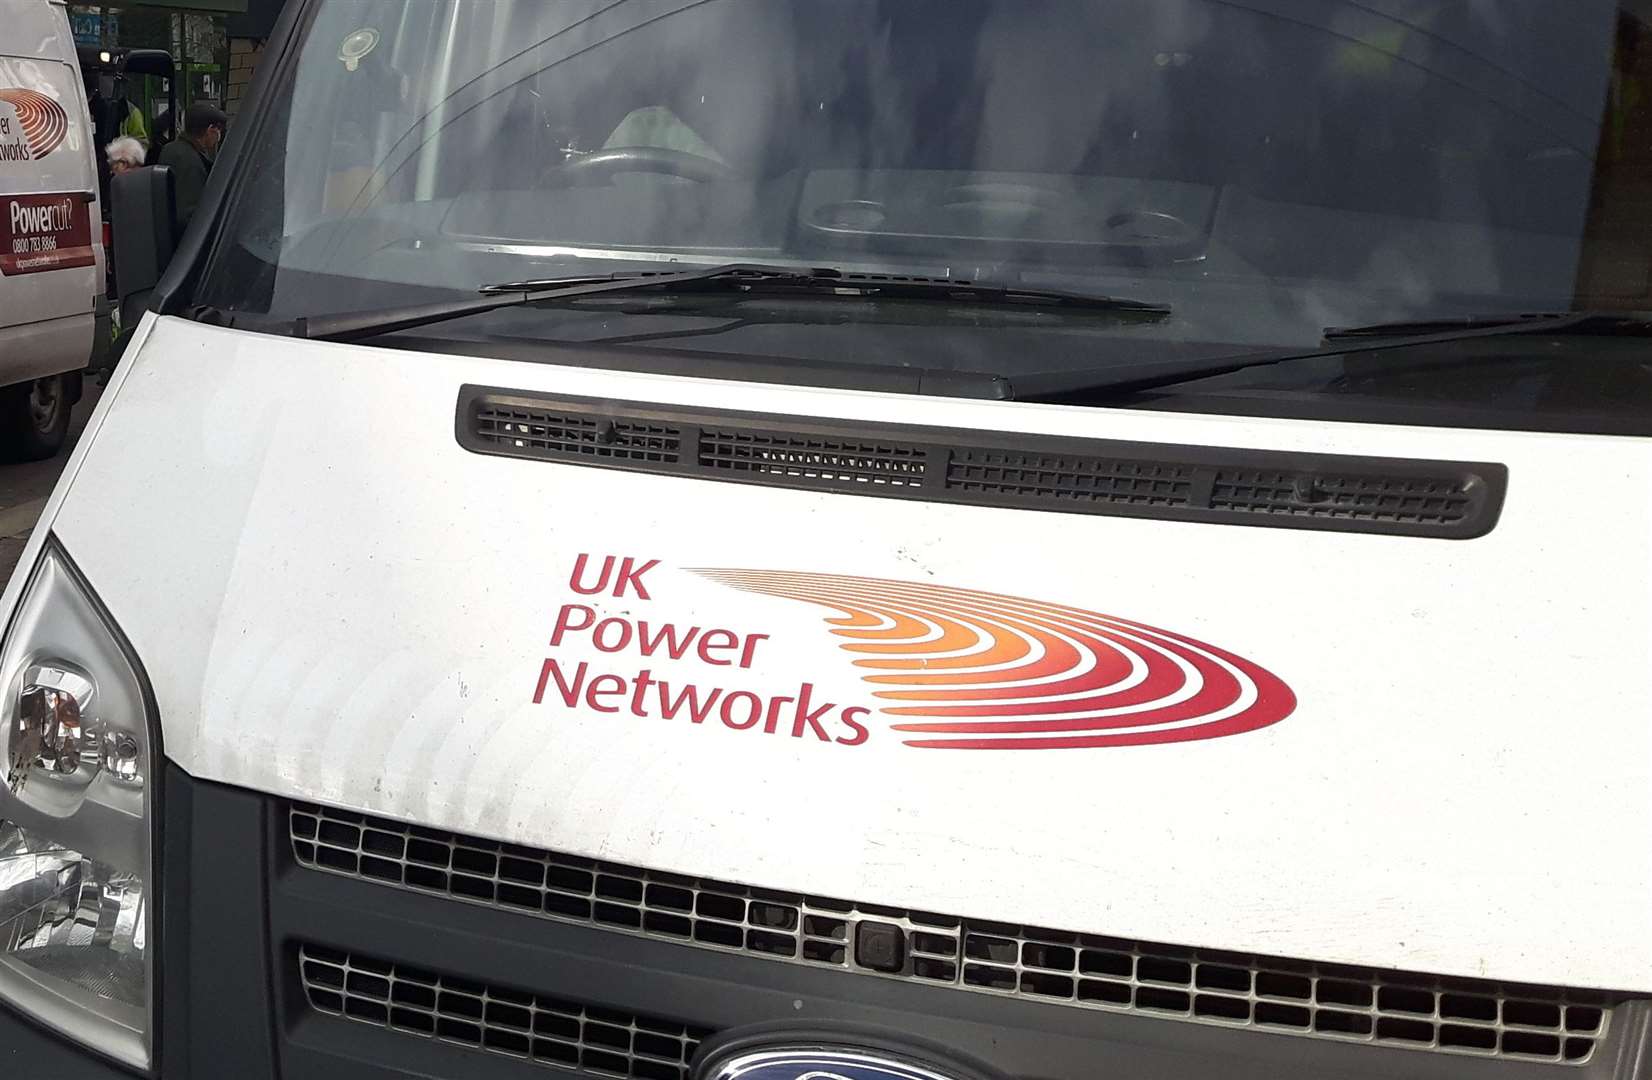 UK Power Networks restored power following the incident across Sittingbourne this afternoon